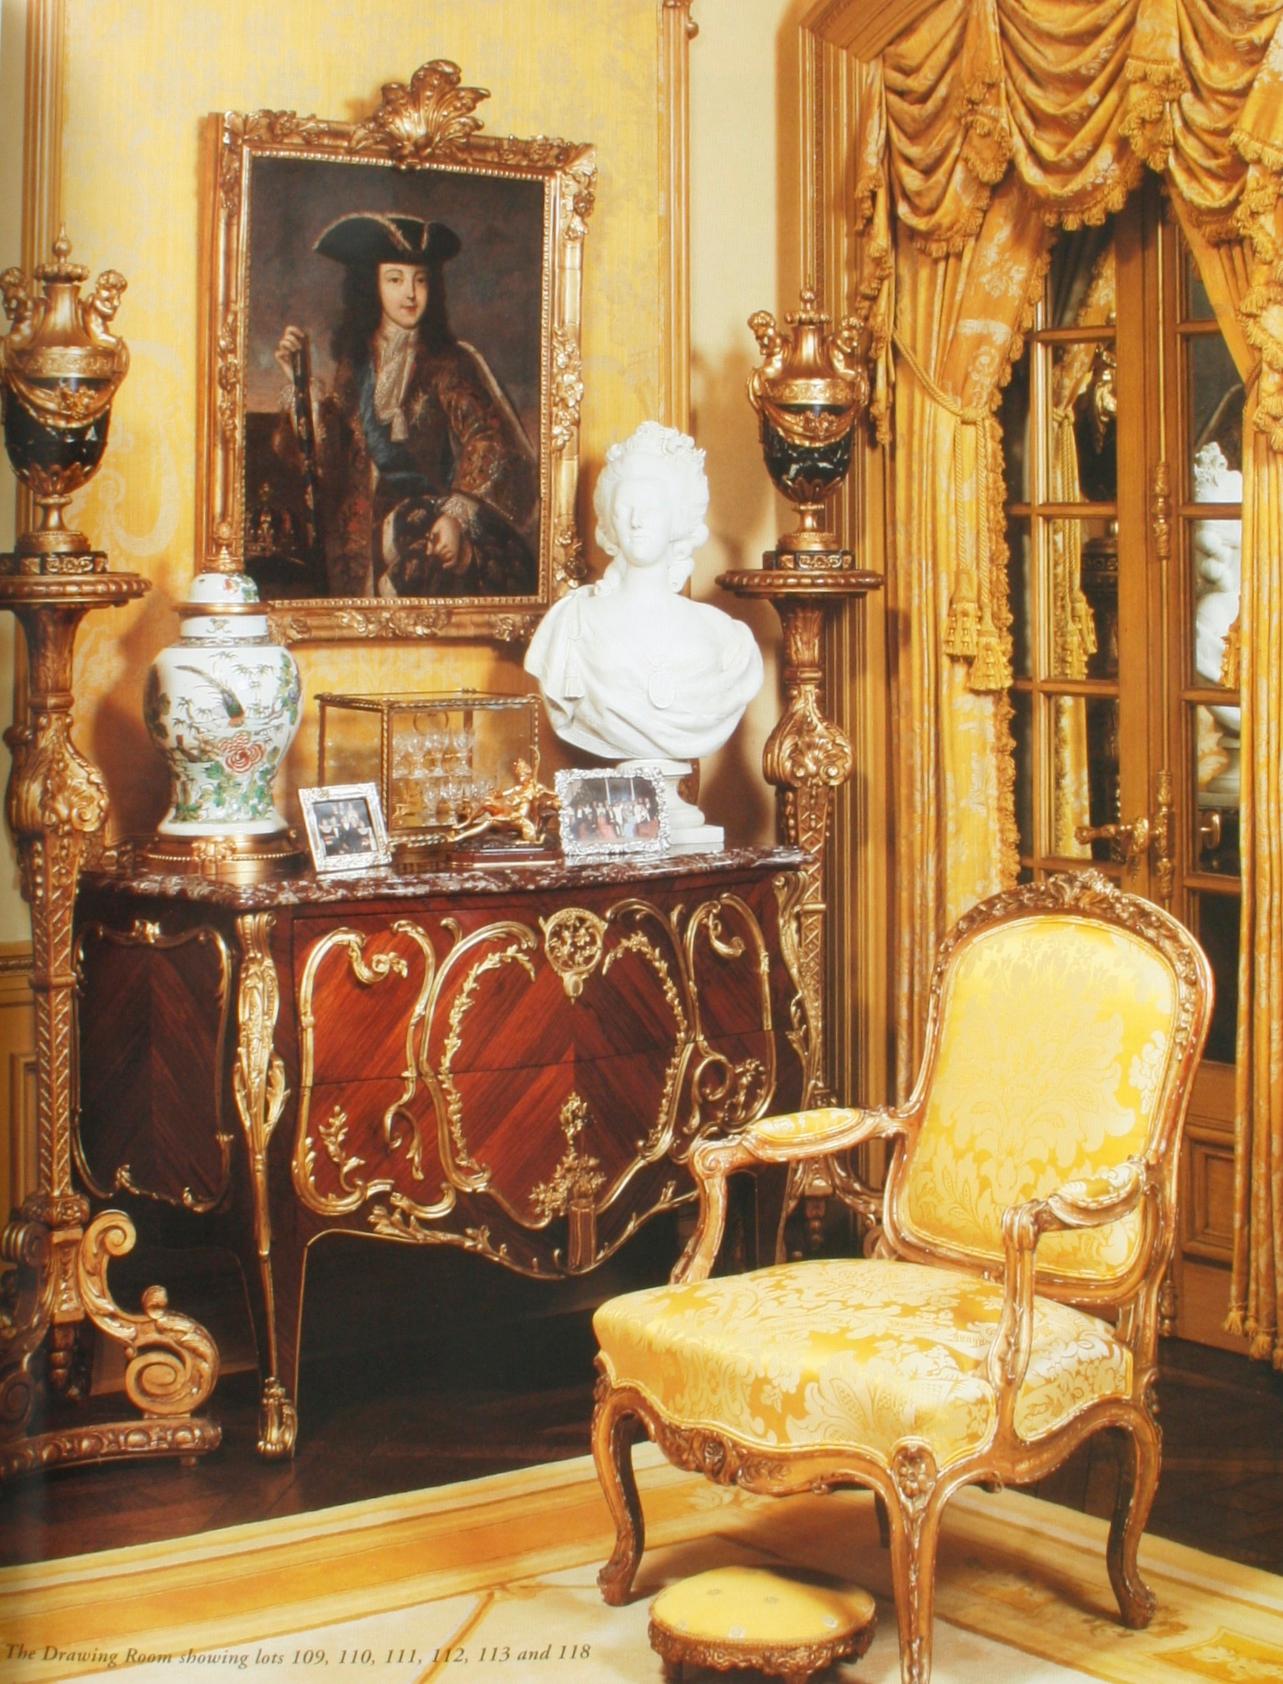 Paper Sotheby's: French Furniture, Works of Art and Paintings, Mary & E.R. Albert Jr